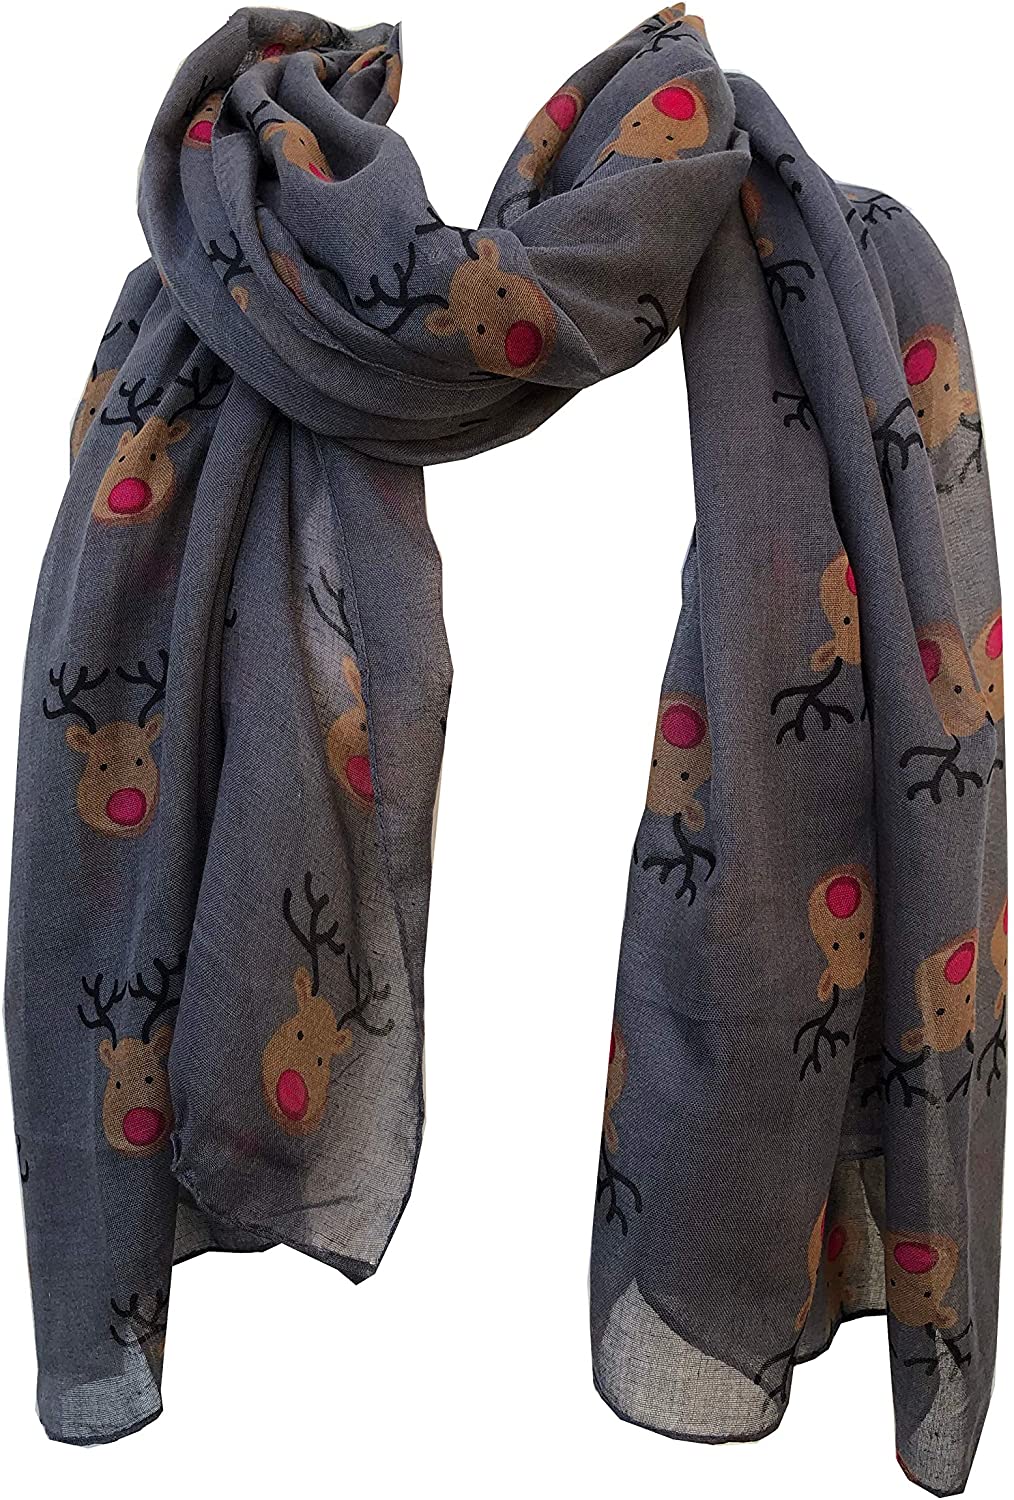 Pamper Yourself Now Grey red Nose Rudolph Reindeer Christmas Long Scarf